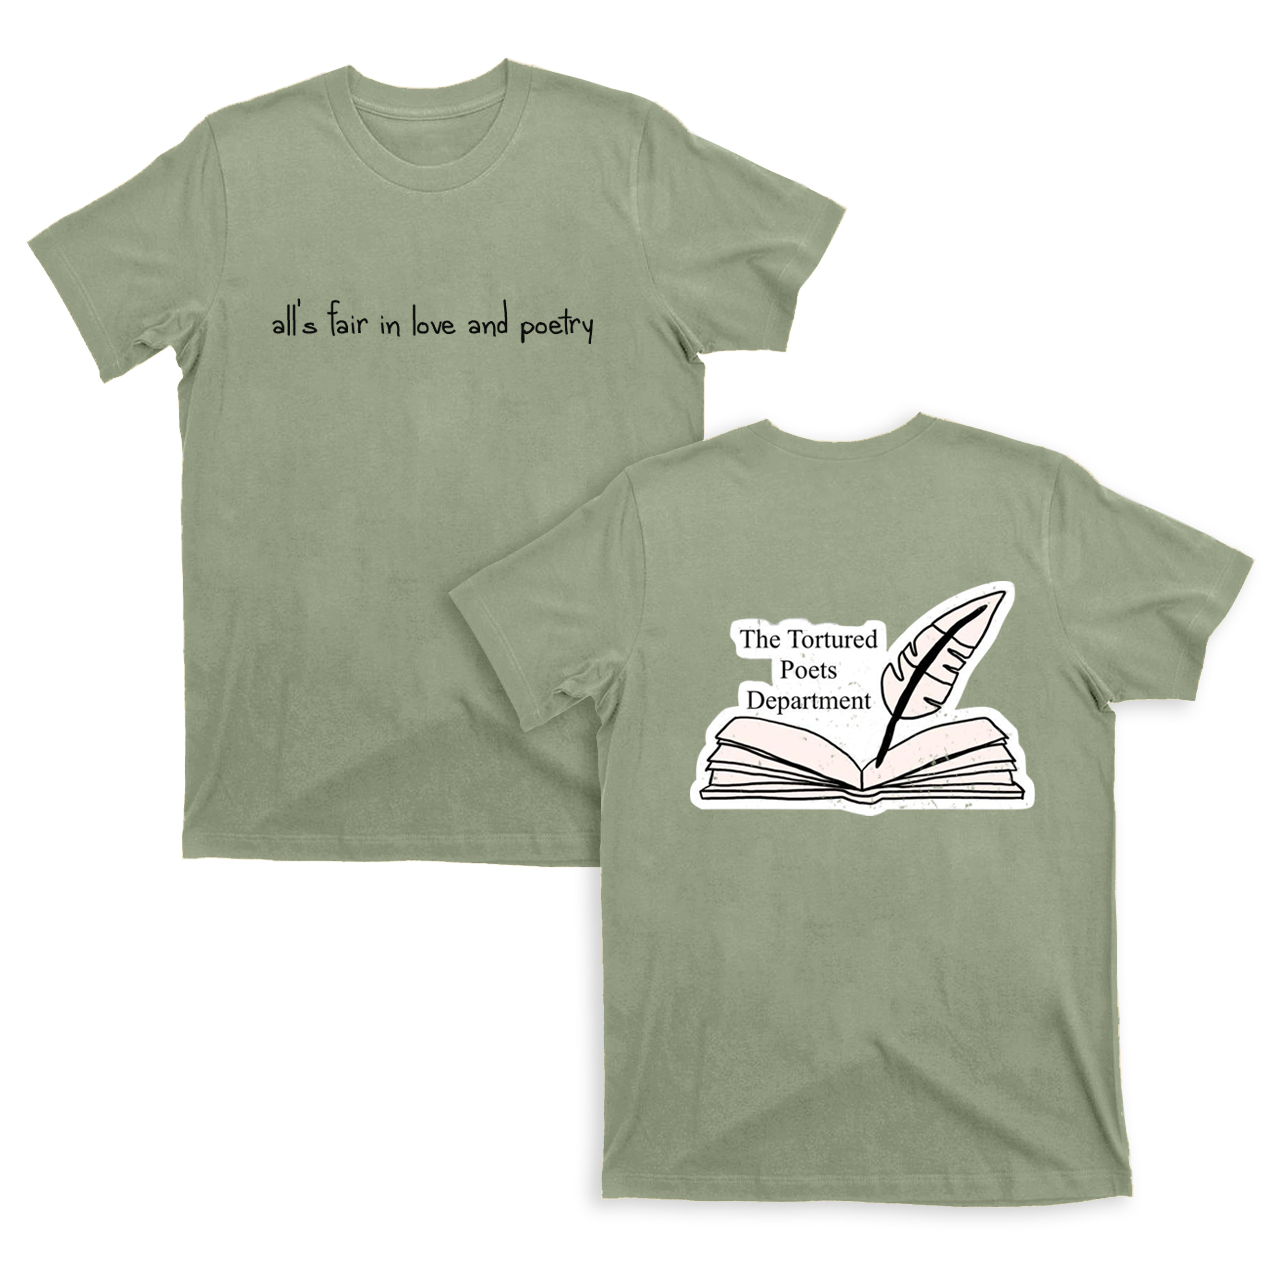 All's Fair In Love and Poetry Tortured Poets Department T-Shirts